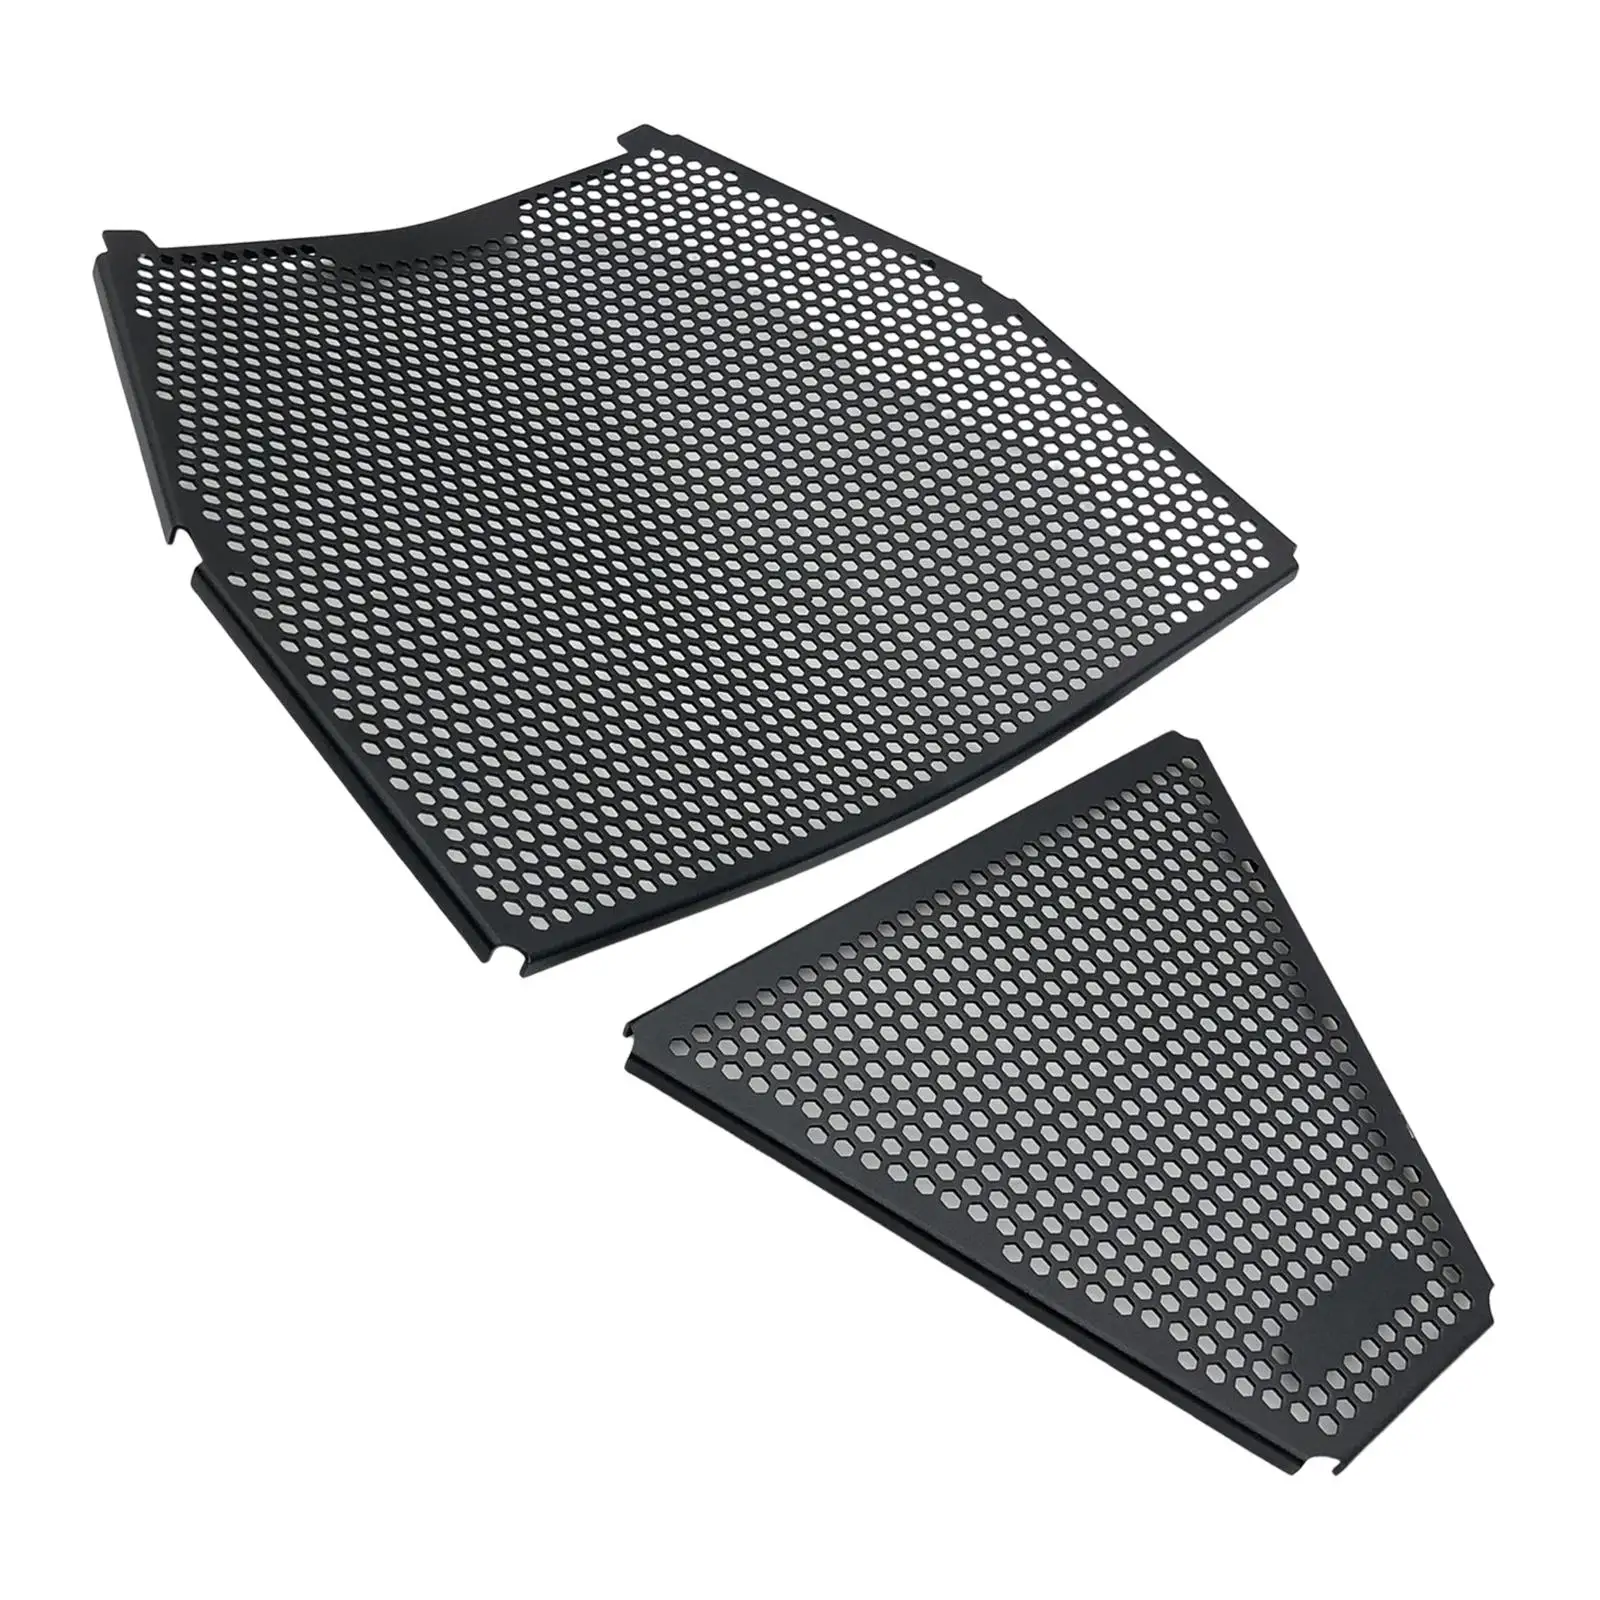 Motorcycle Radiator Grille Replaces Easy to Install High Performance Durable Protective Cover Accessories for V4